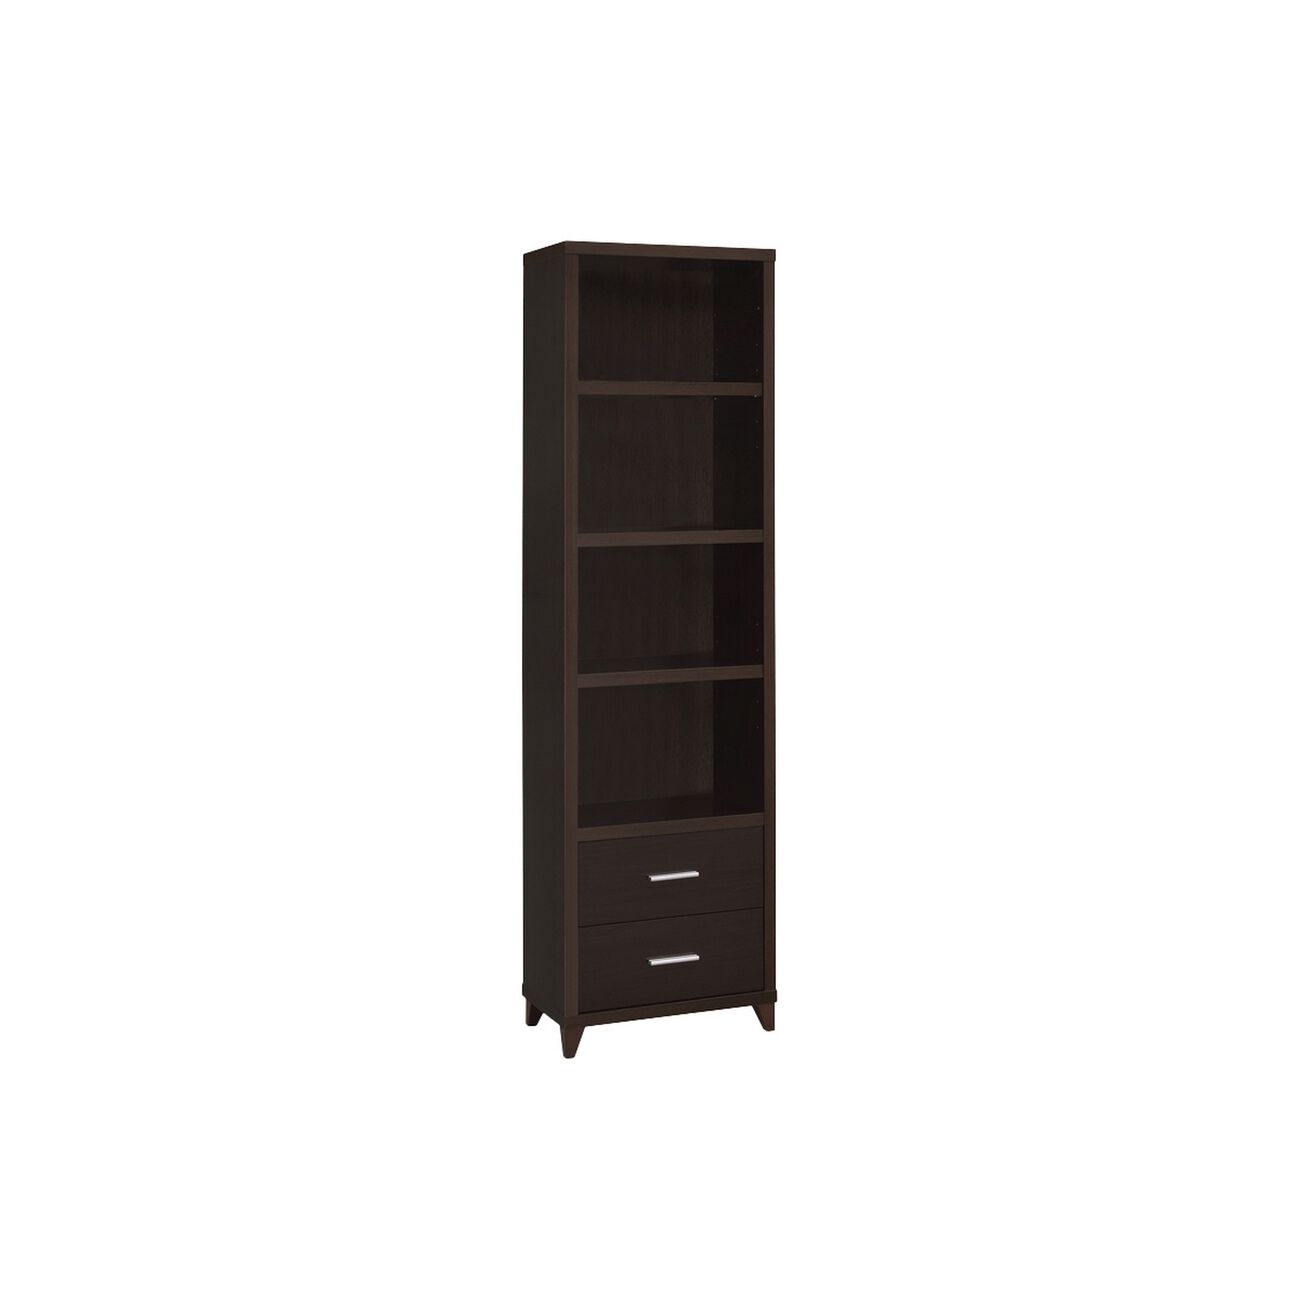 3 Shelf Wooden Media Tower with 2 Drawers, Dark Brown